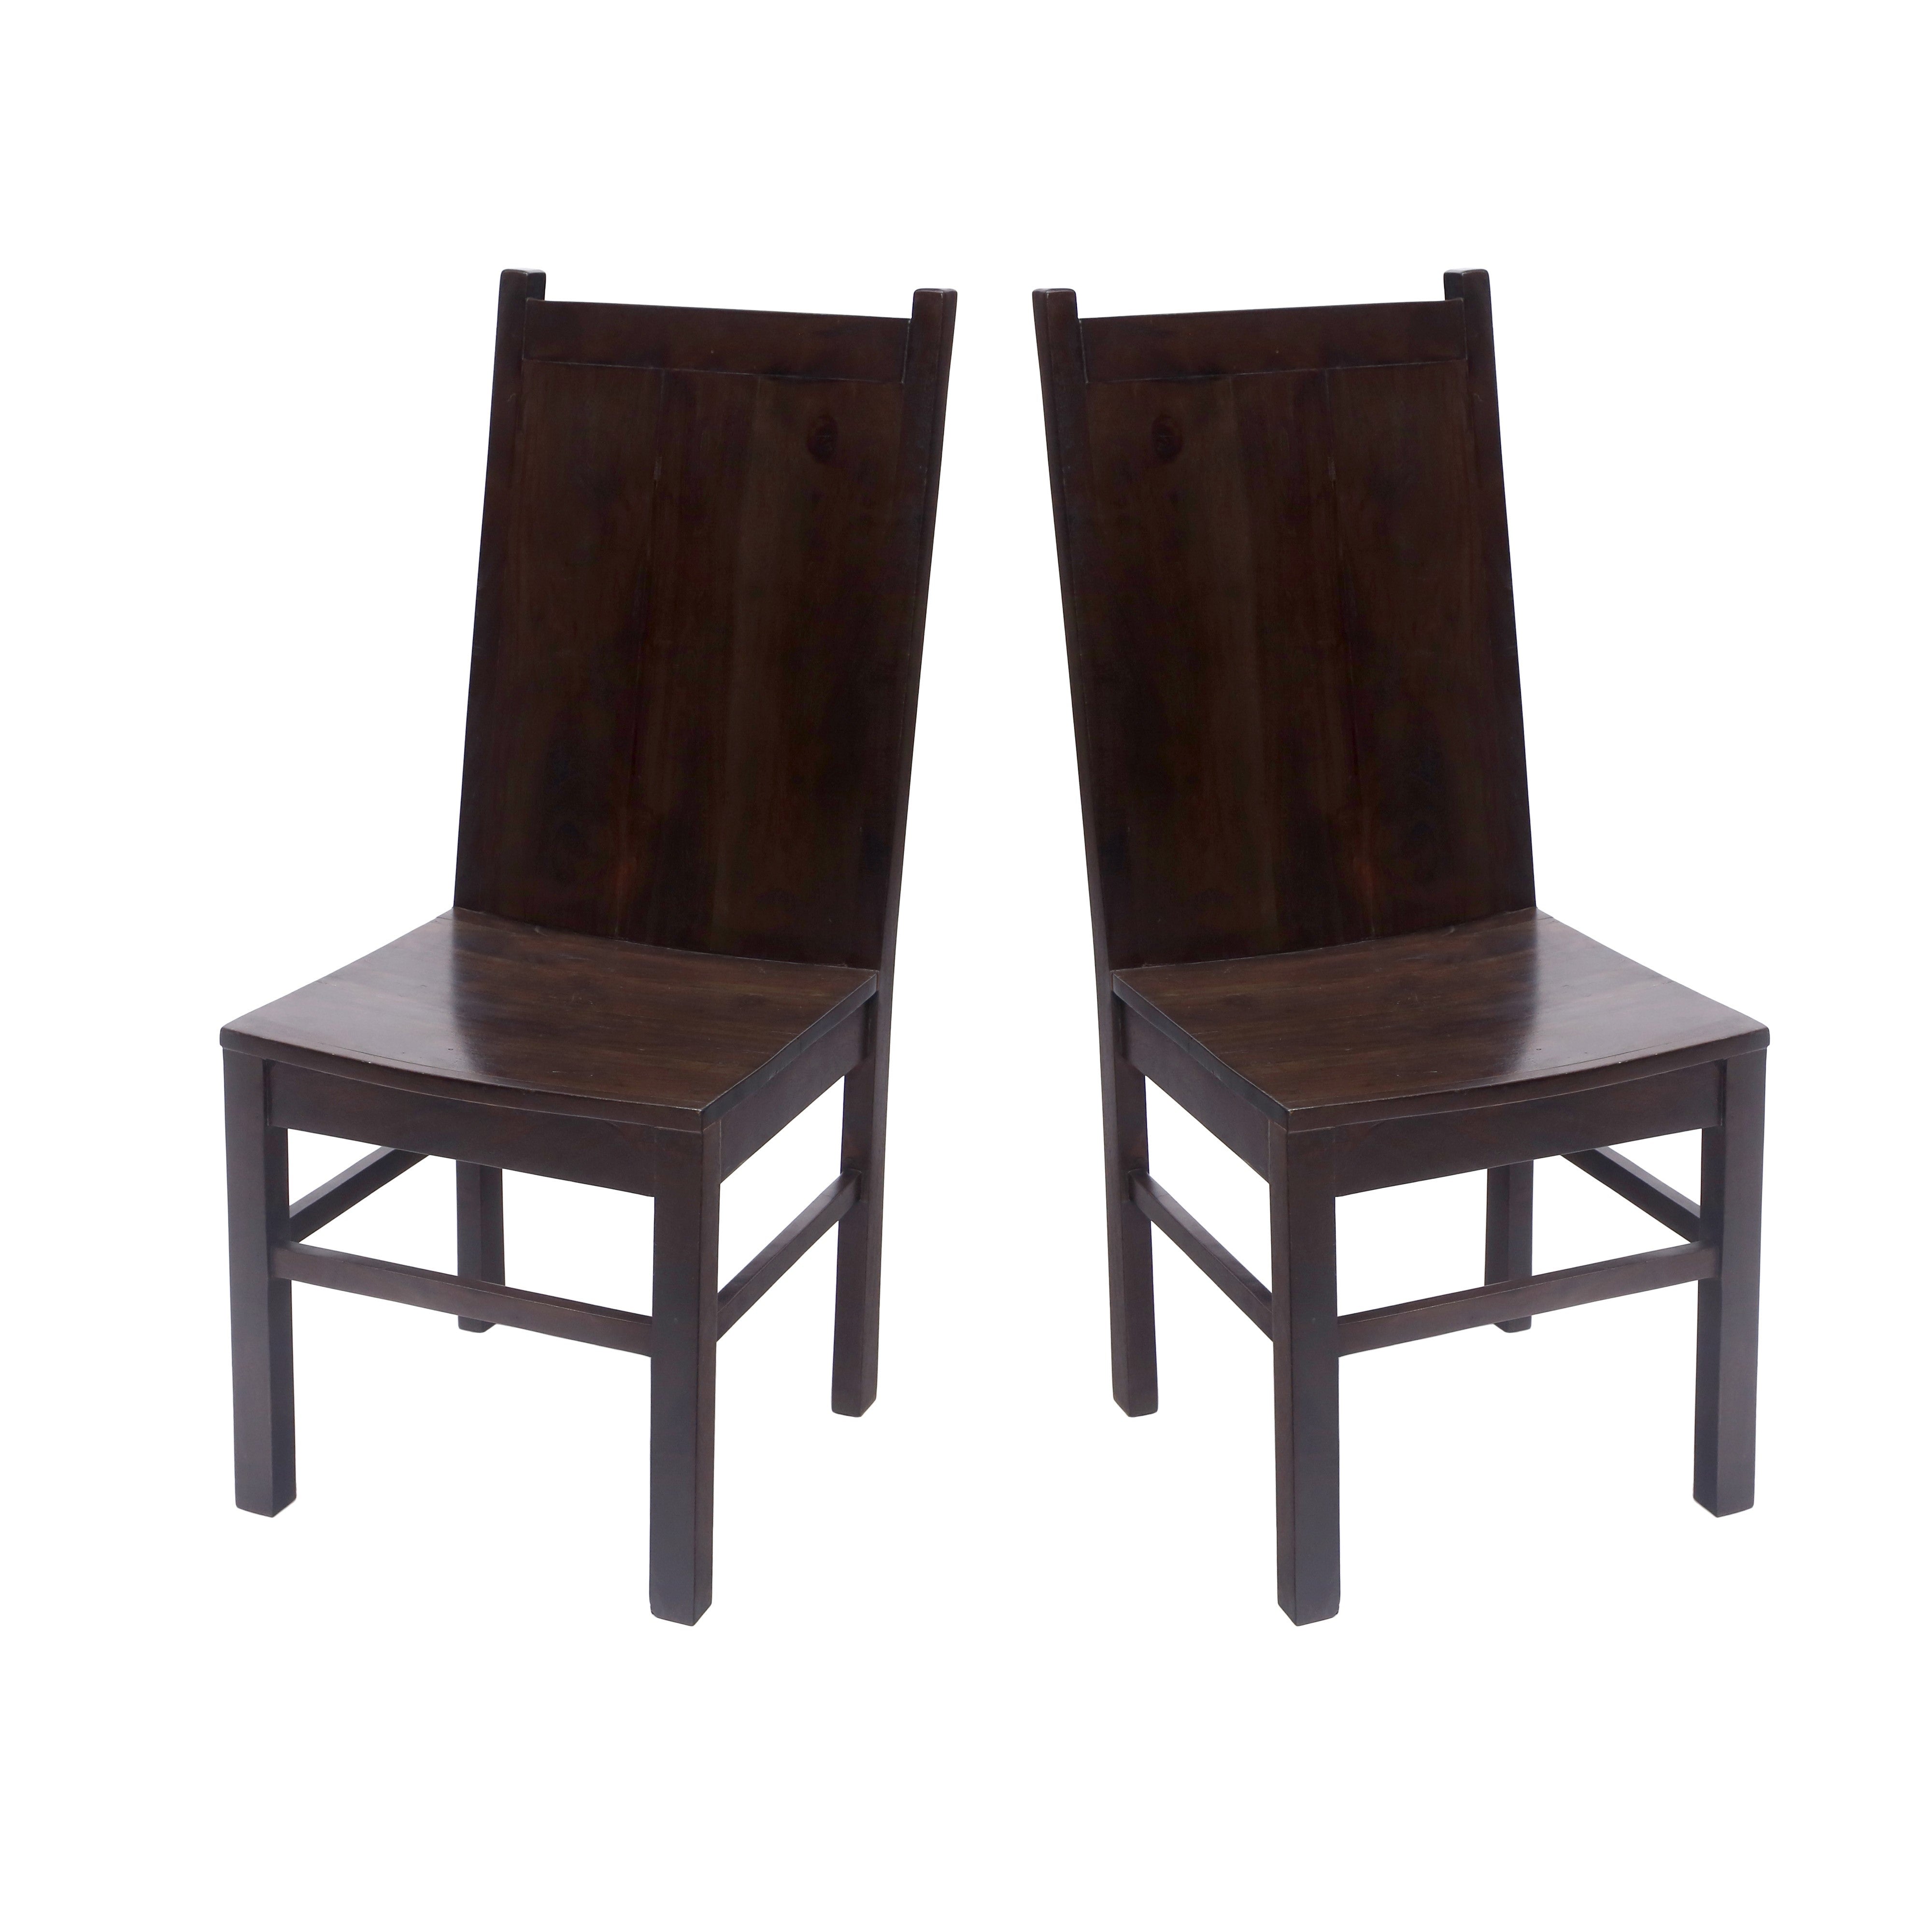 (Set of 2) Long Back Wooden Dinning Chair Dining Chair